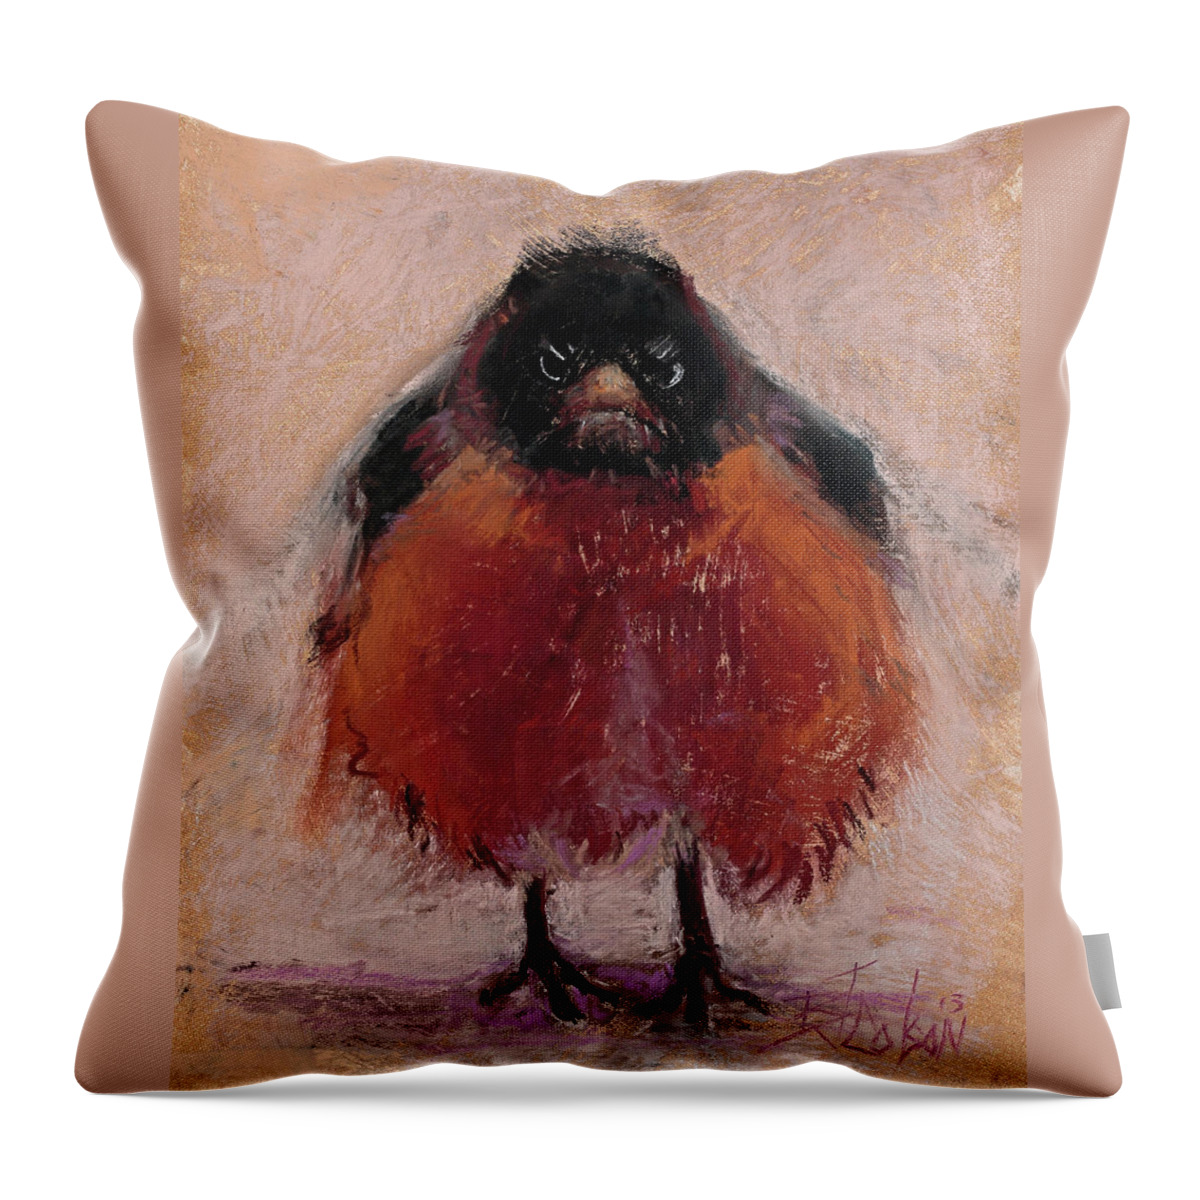 Robin Throw Pillow featuring the painting The Original Angry Bird by Billie Colson